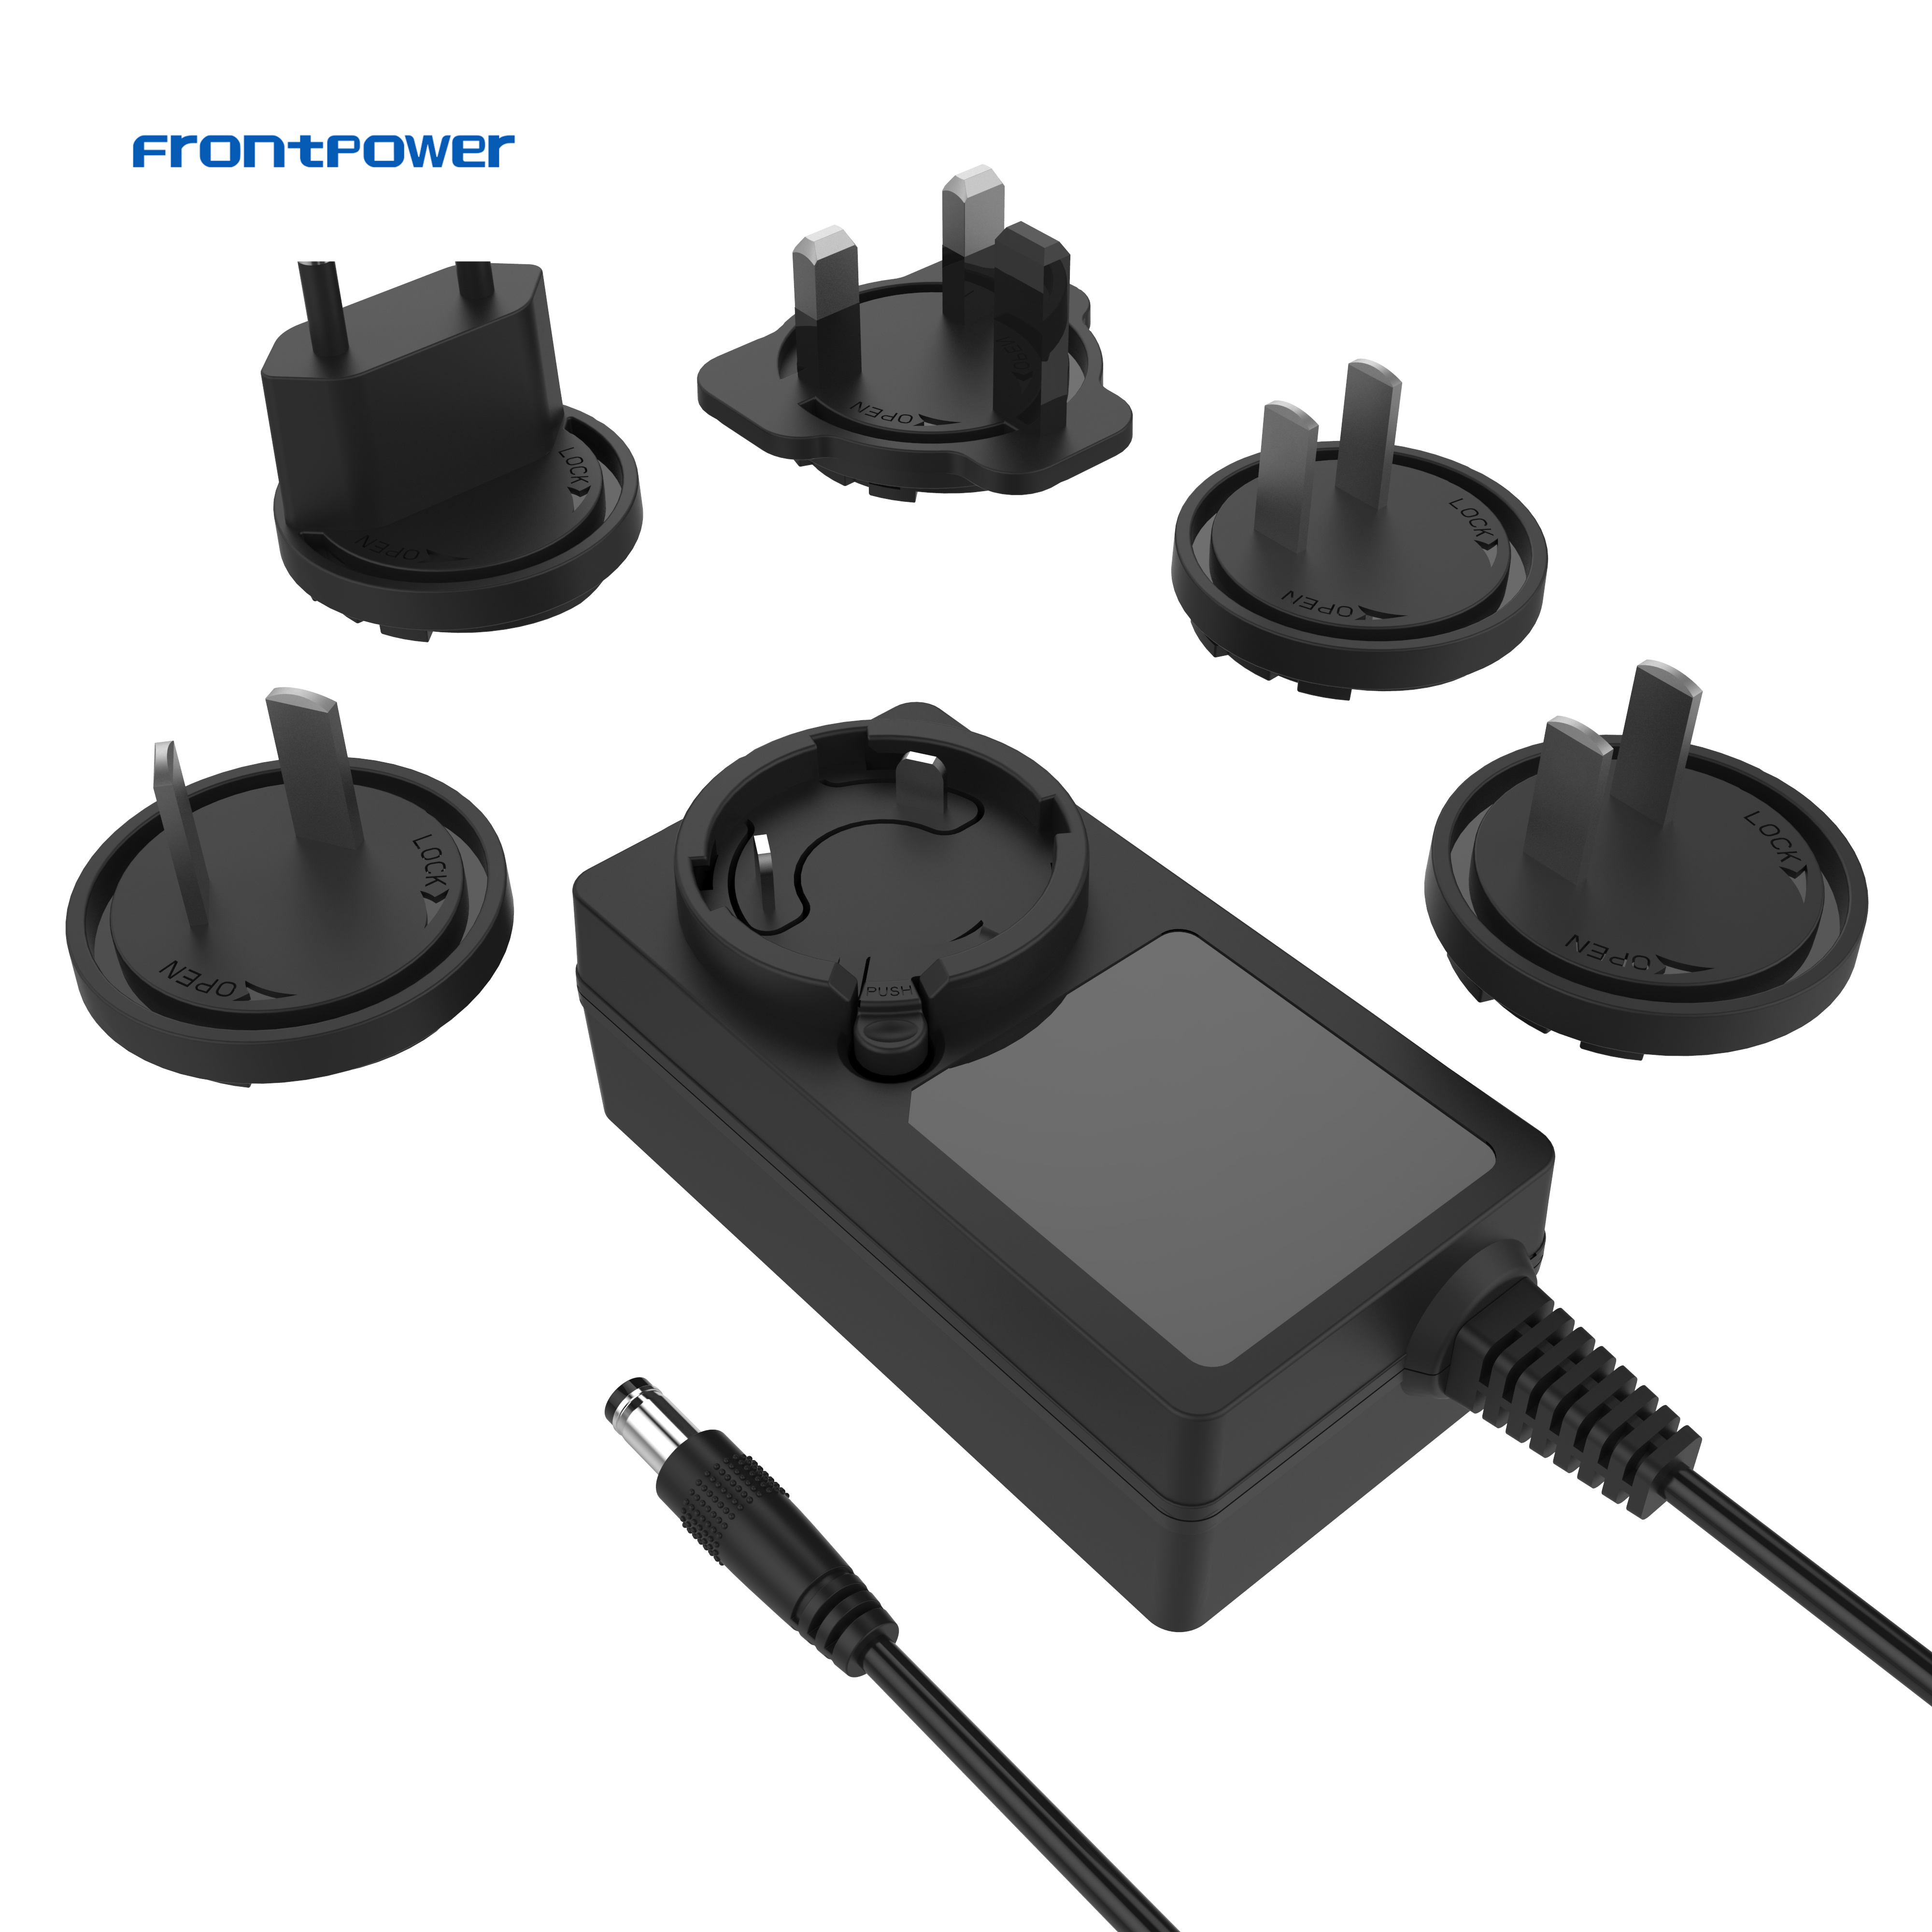 9V 12V power adaptor 5V 4A 5A 6A UL CB CE GS SAA KC FCC PSE CCC RCM interchangeable plug power adapter charger